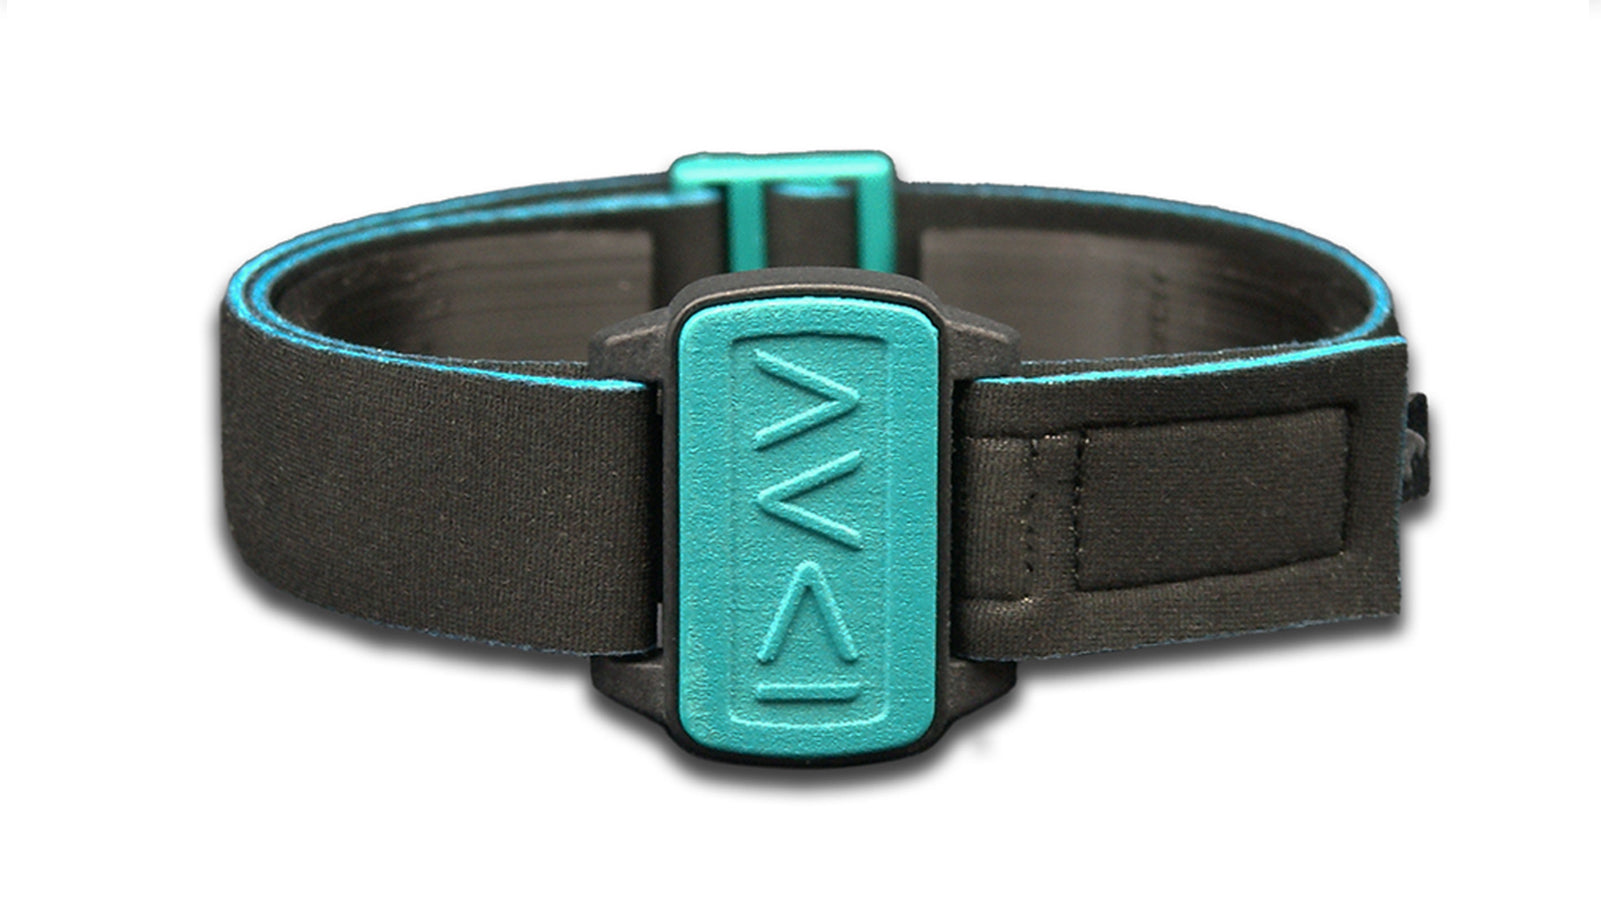 Dexband armband for Dexcom G6 & ONE cgm with black strap and teal cover showing symbols for I am greater.